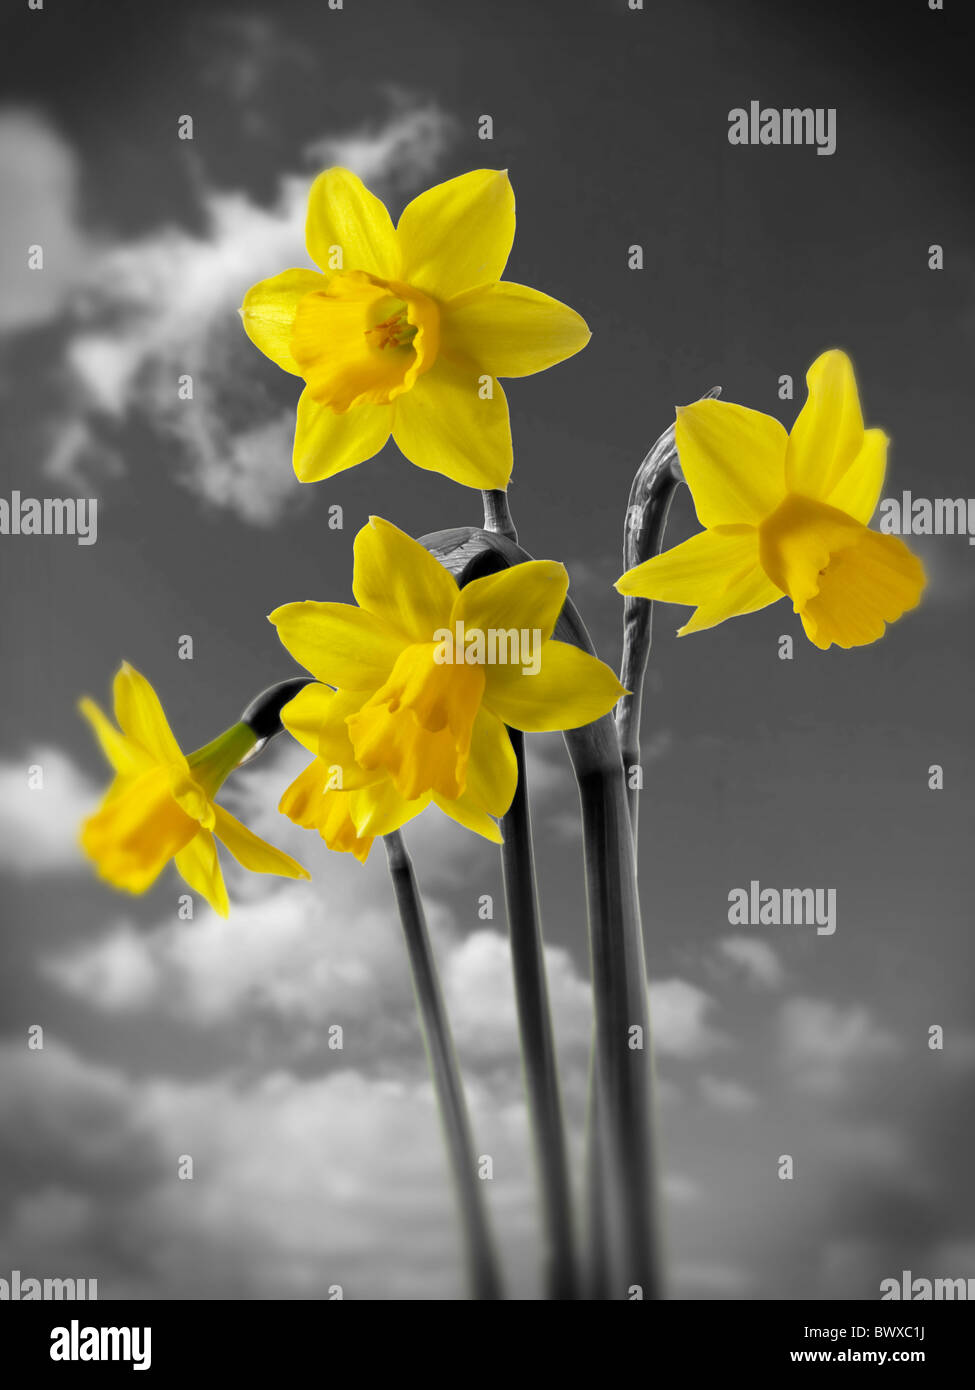 Spring daffodils flowering Stock Photo